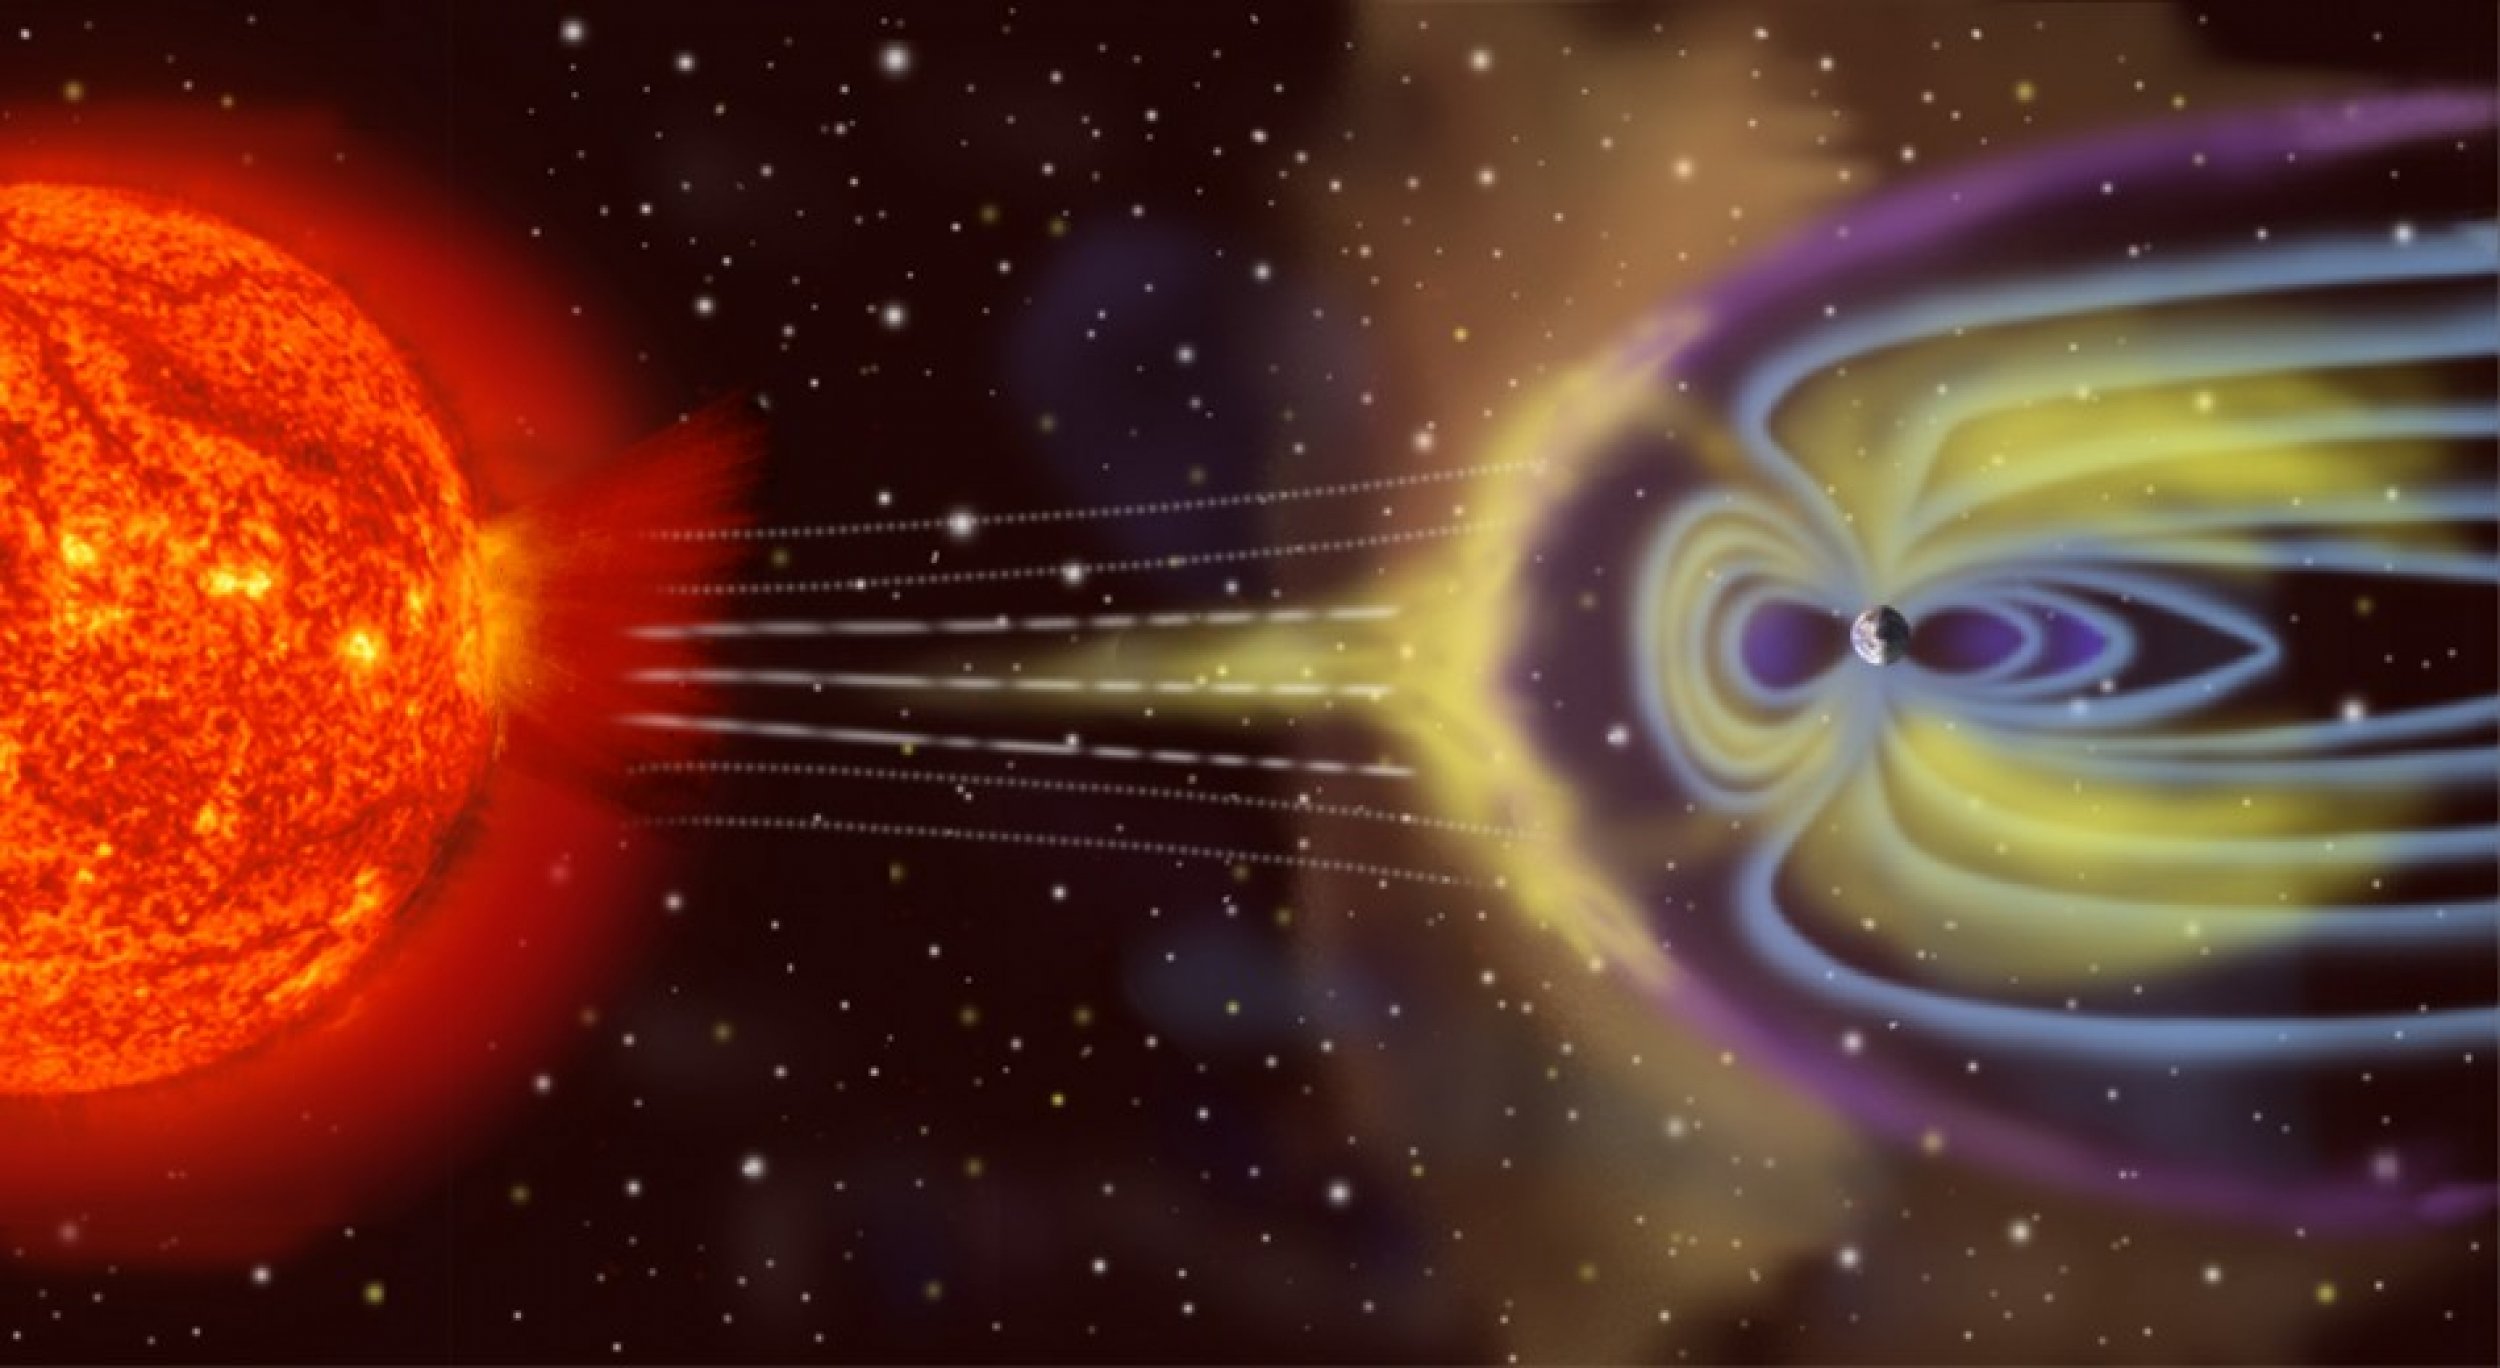 Artists depiction of solar wind colliding with Earths magnetosphere.